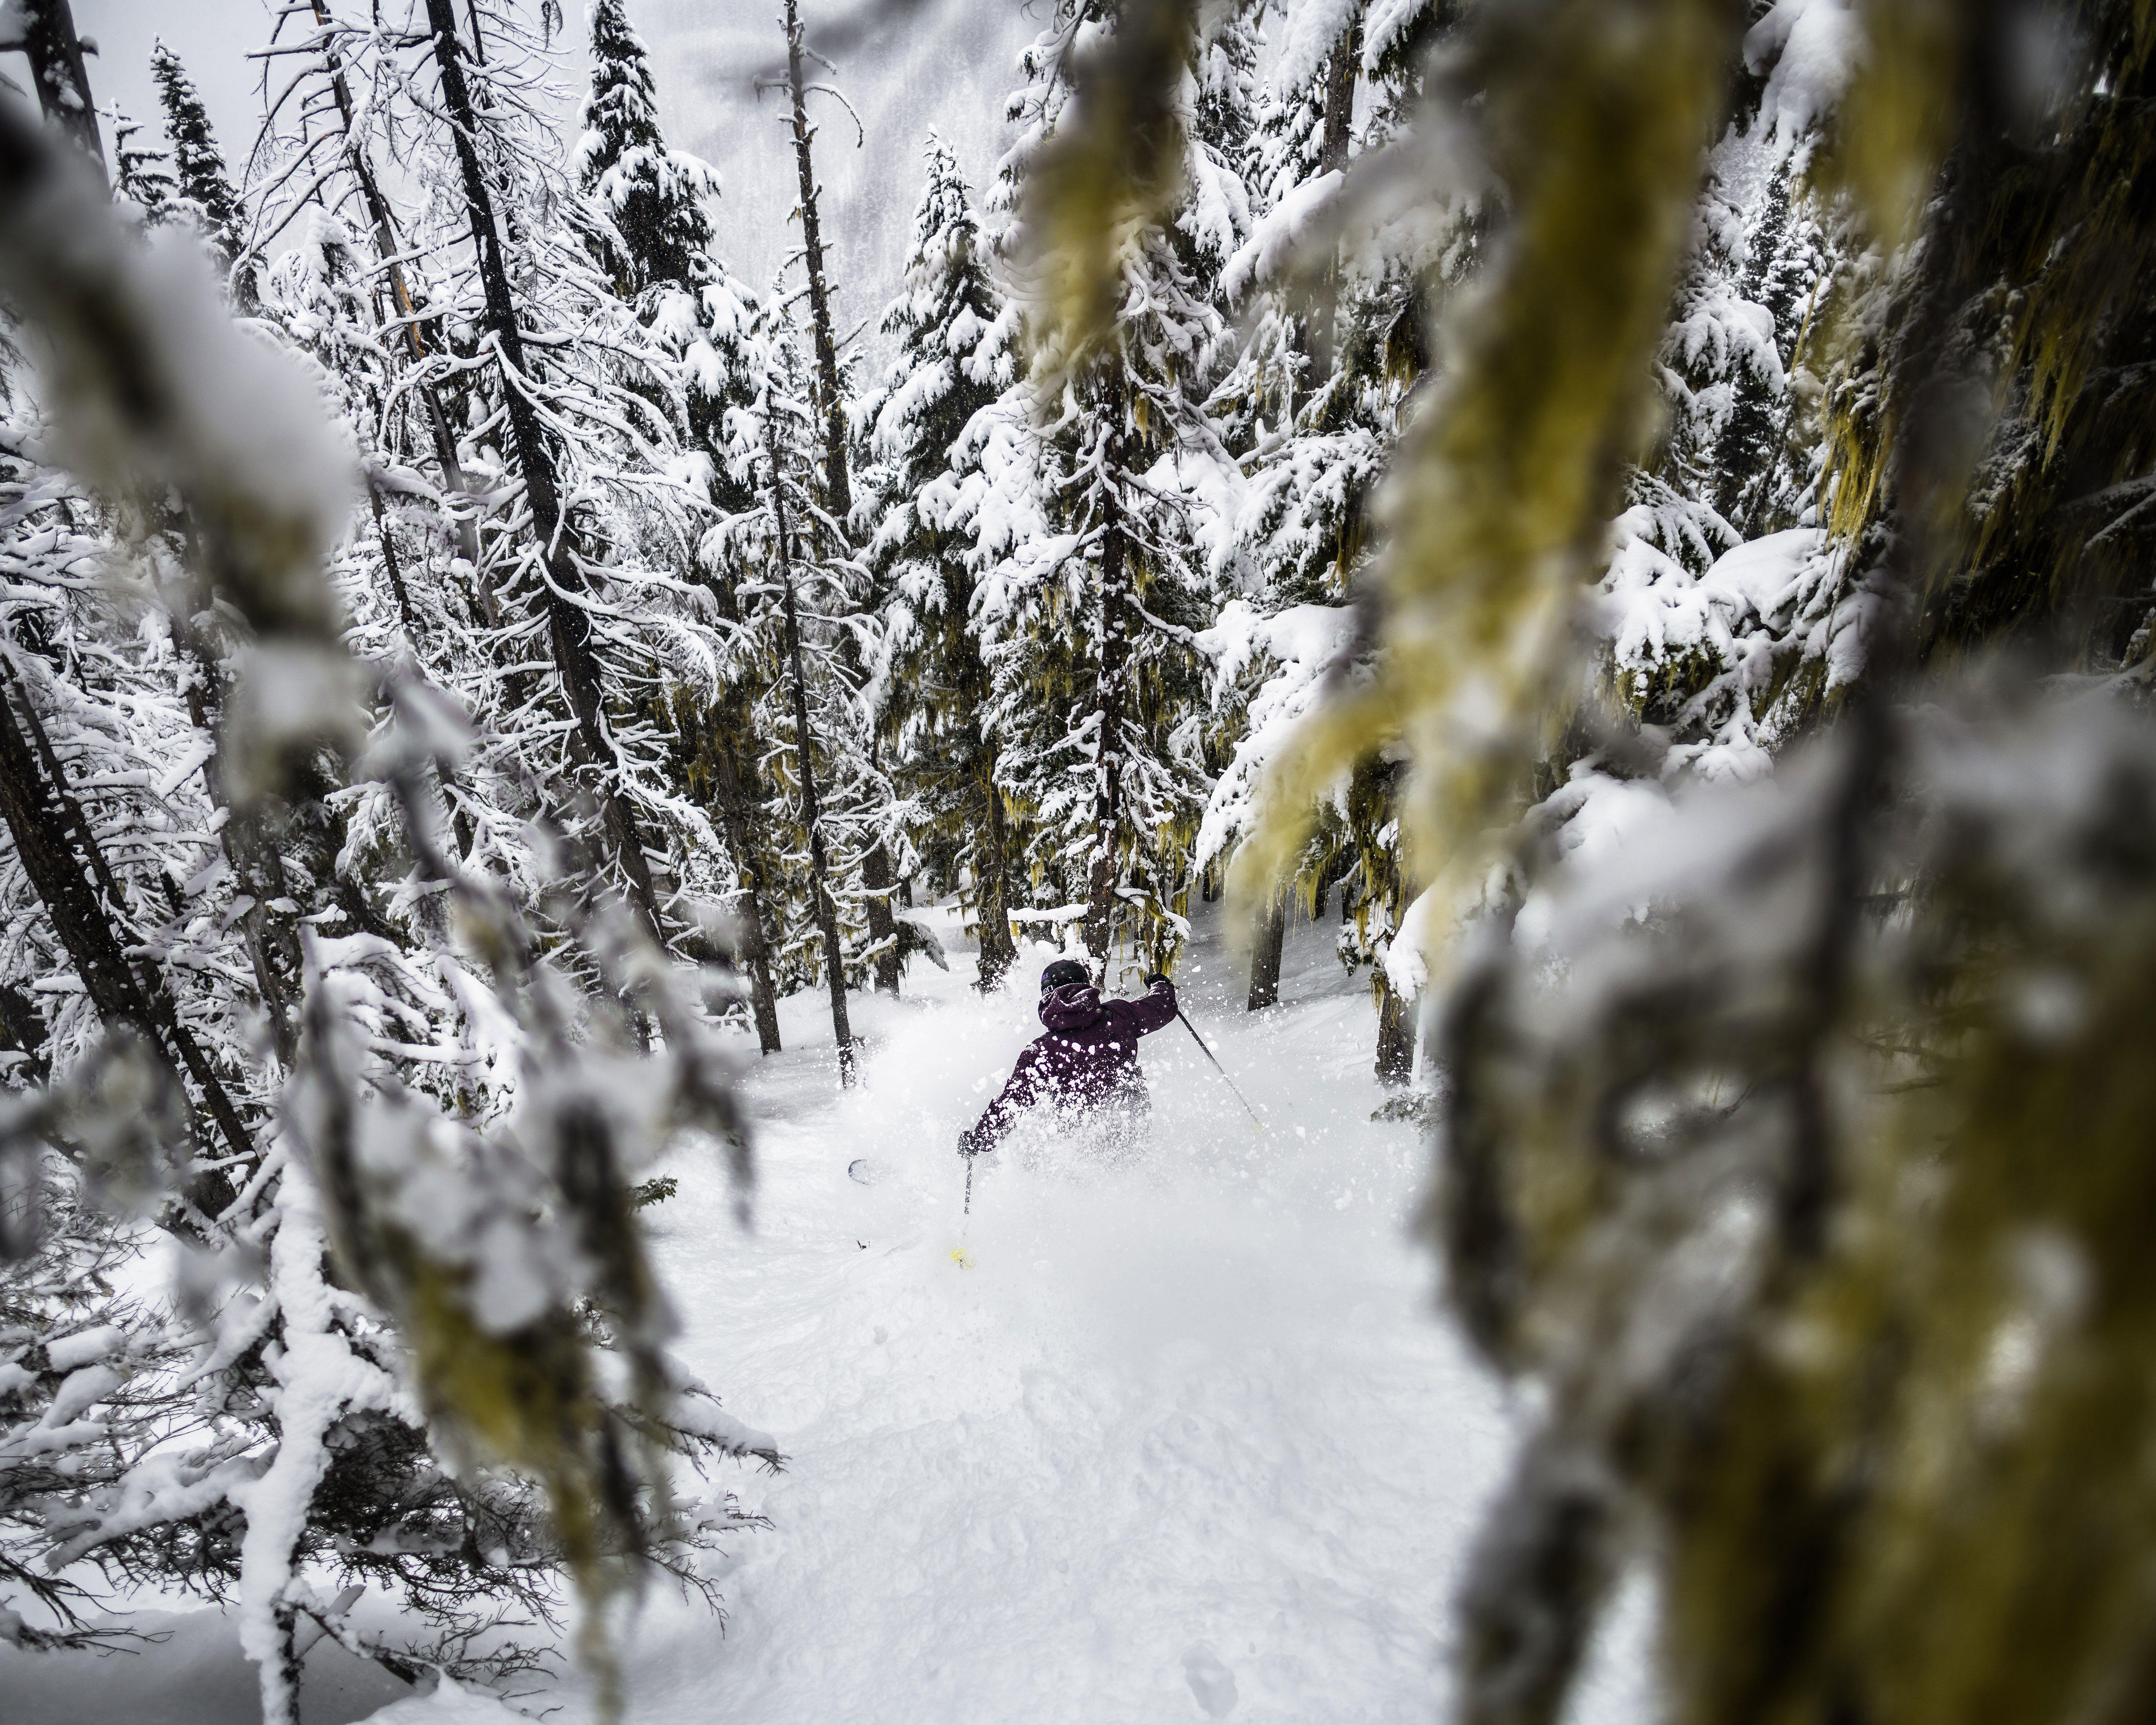 Whistler Skiing Vacations: A skier doing a gladed tree run.